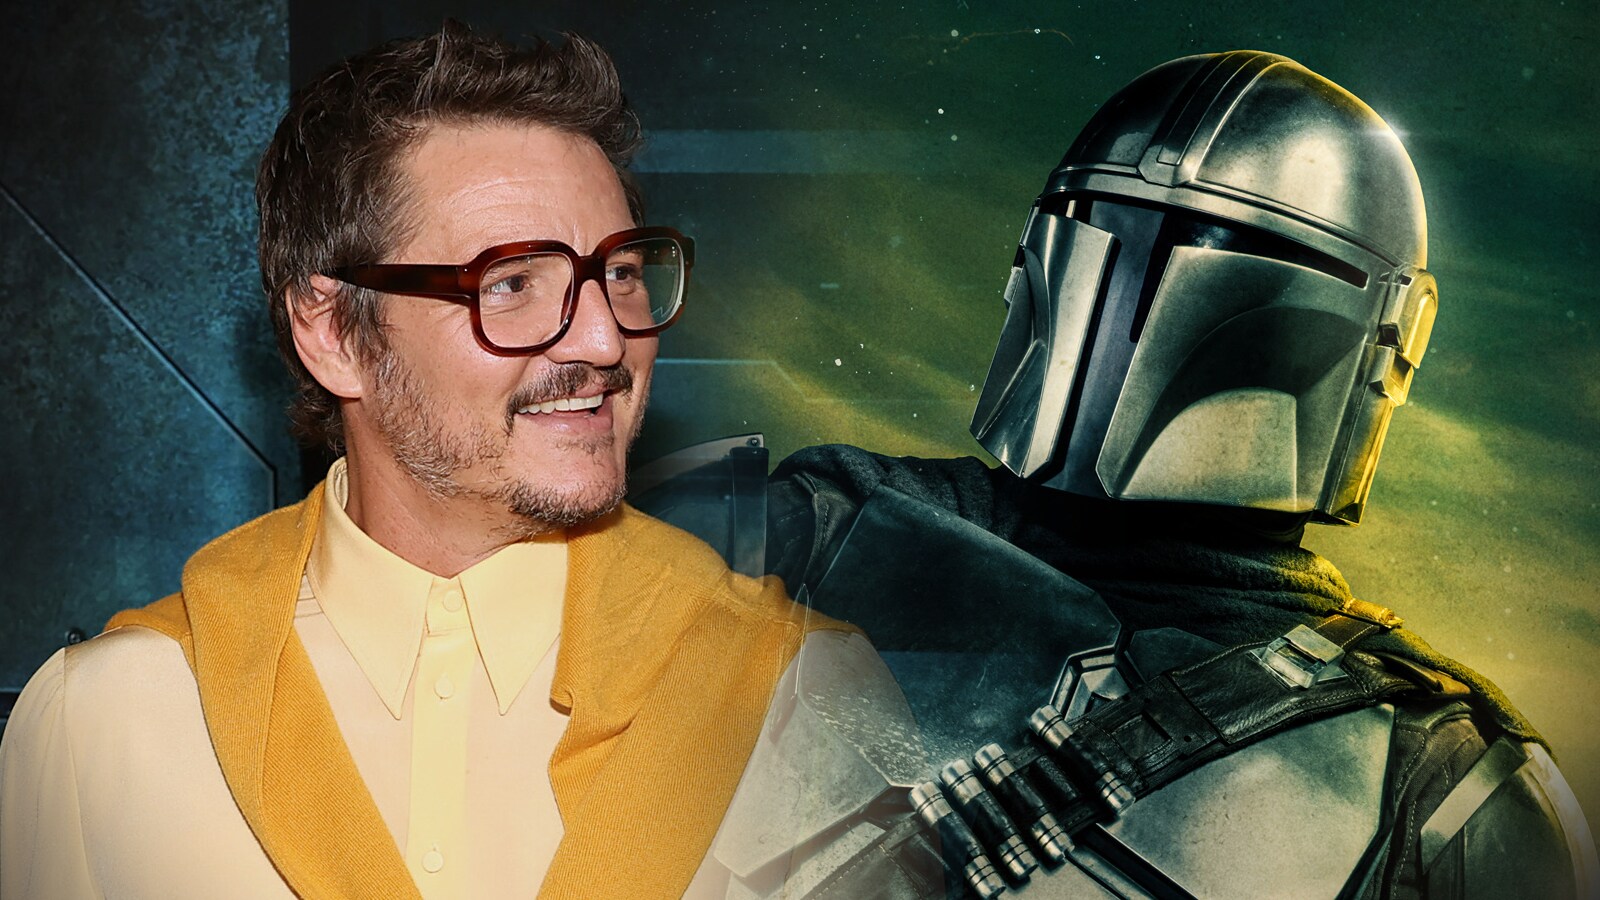 “What His Heart Needs Is Grogu”: Pedro Pascal Is the Mandalorian